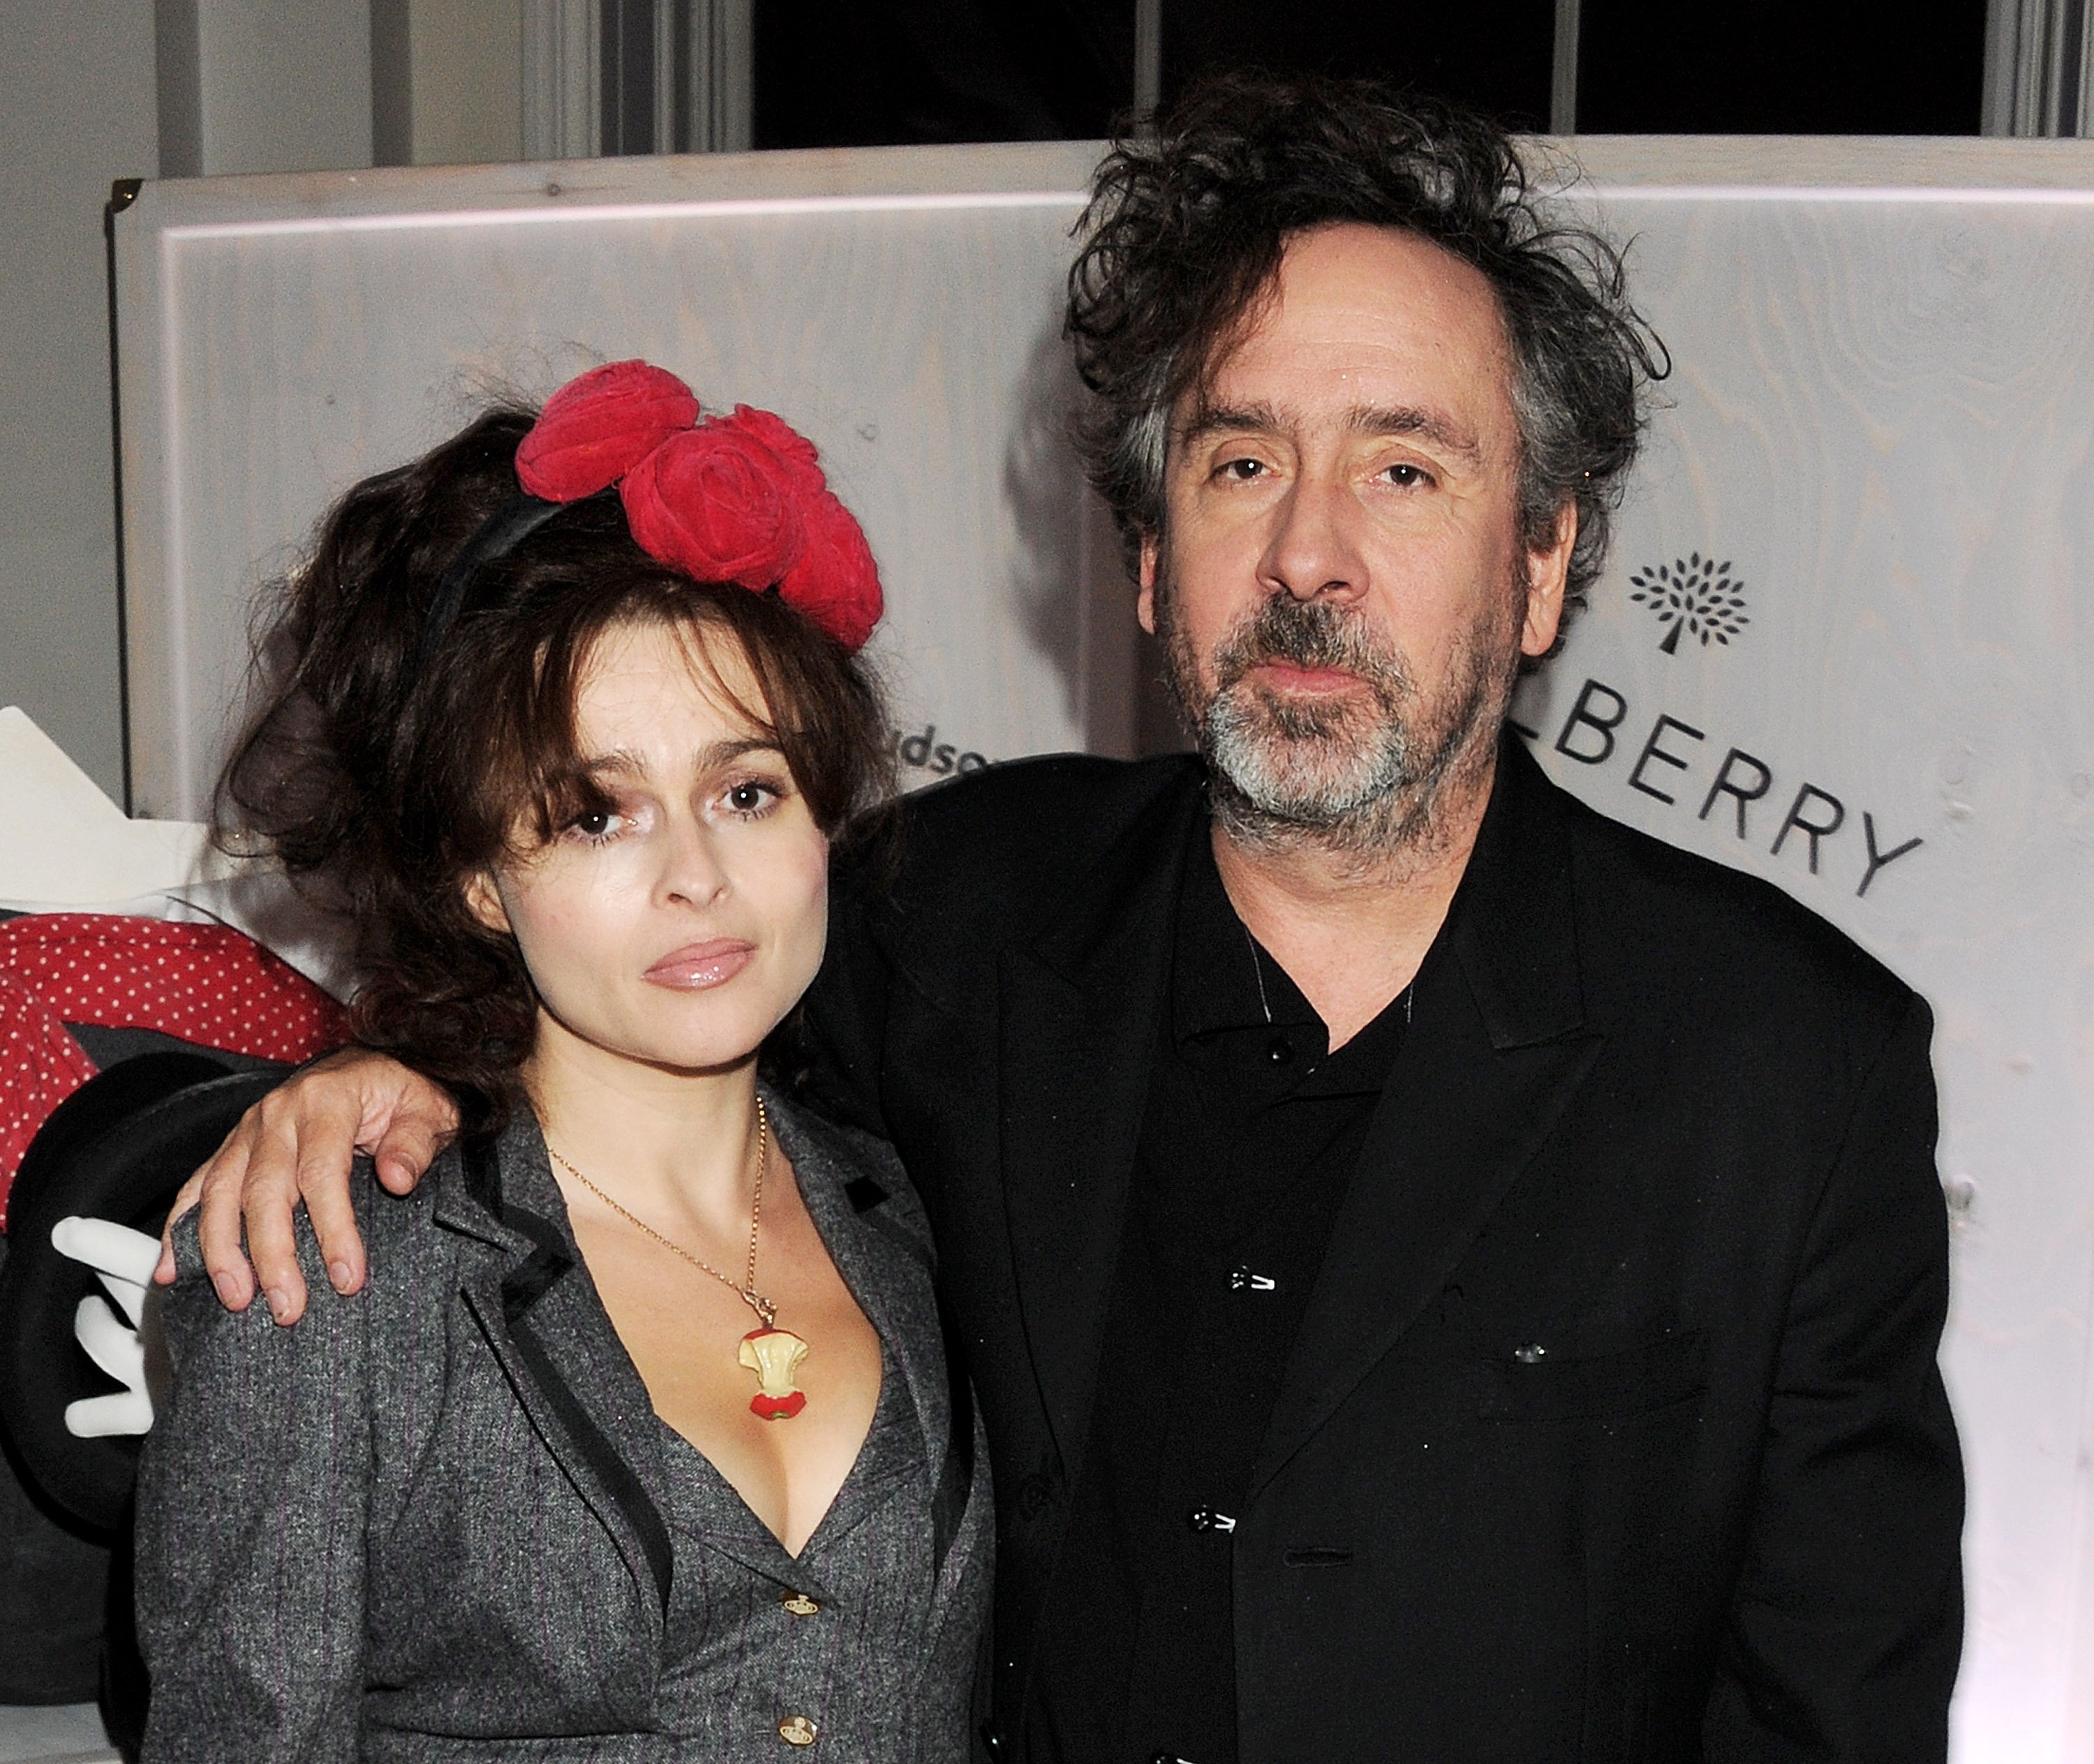 Helena Bonham Carter and Tim Burton attend a viewing of "Tim Walker: Story Teller" in London, England on October 17, 2012 | Photo: Getty Images